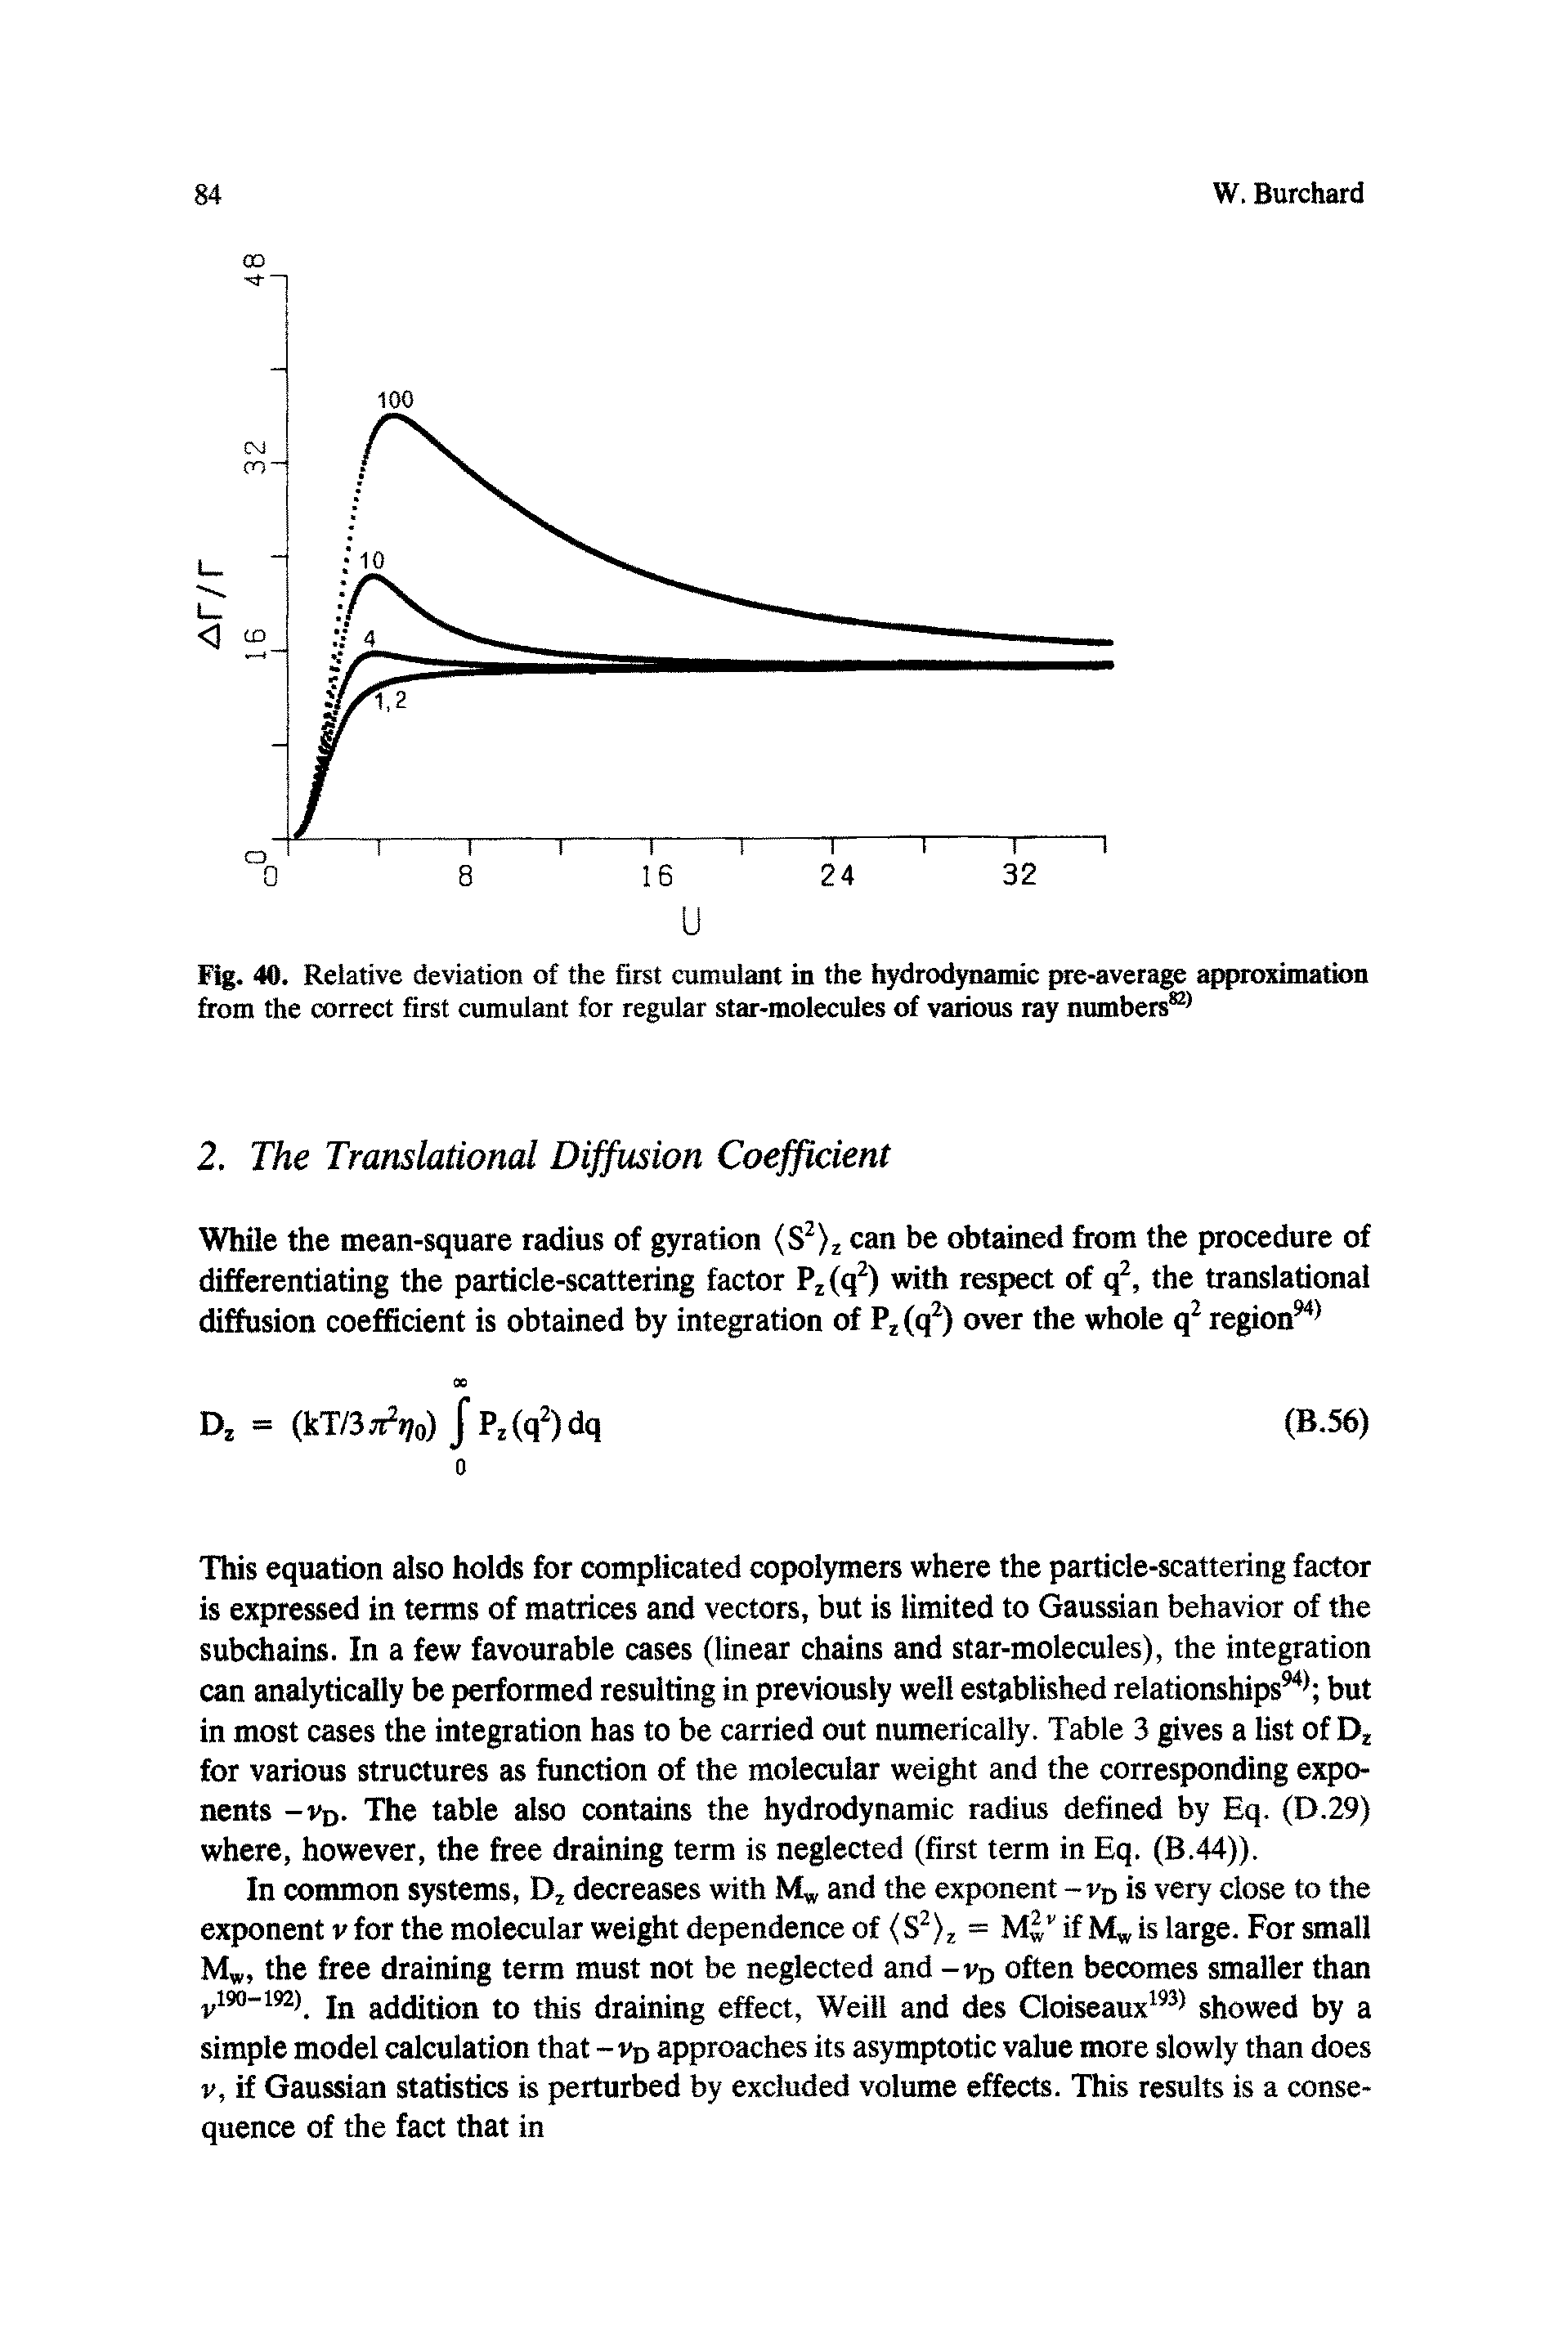 Fig. 40. Relative deviation of the first eumulant in the hydrodynamic pre-average approximation from the correct first eumulant for regular star-molecules of various ray numbers82 ...